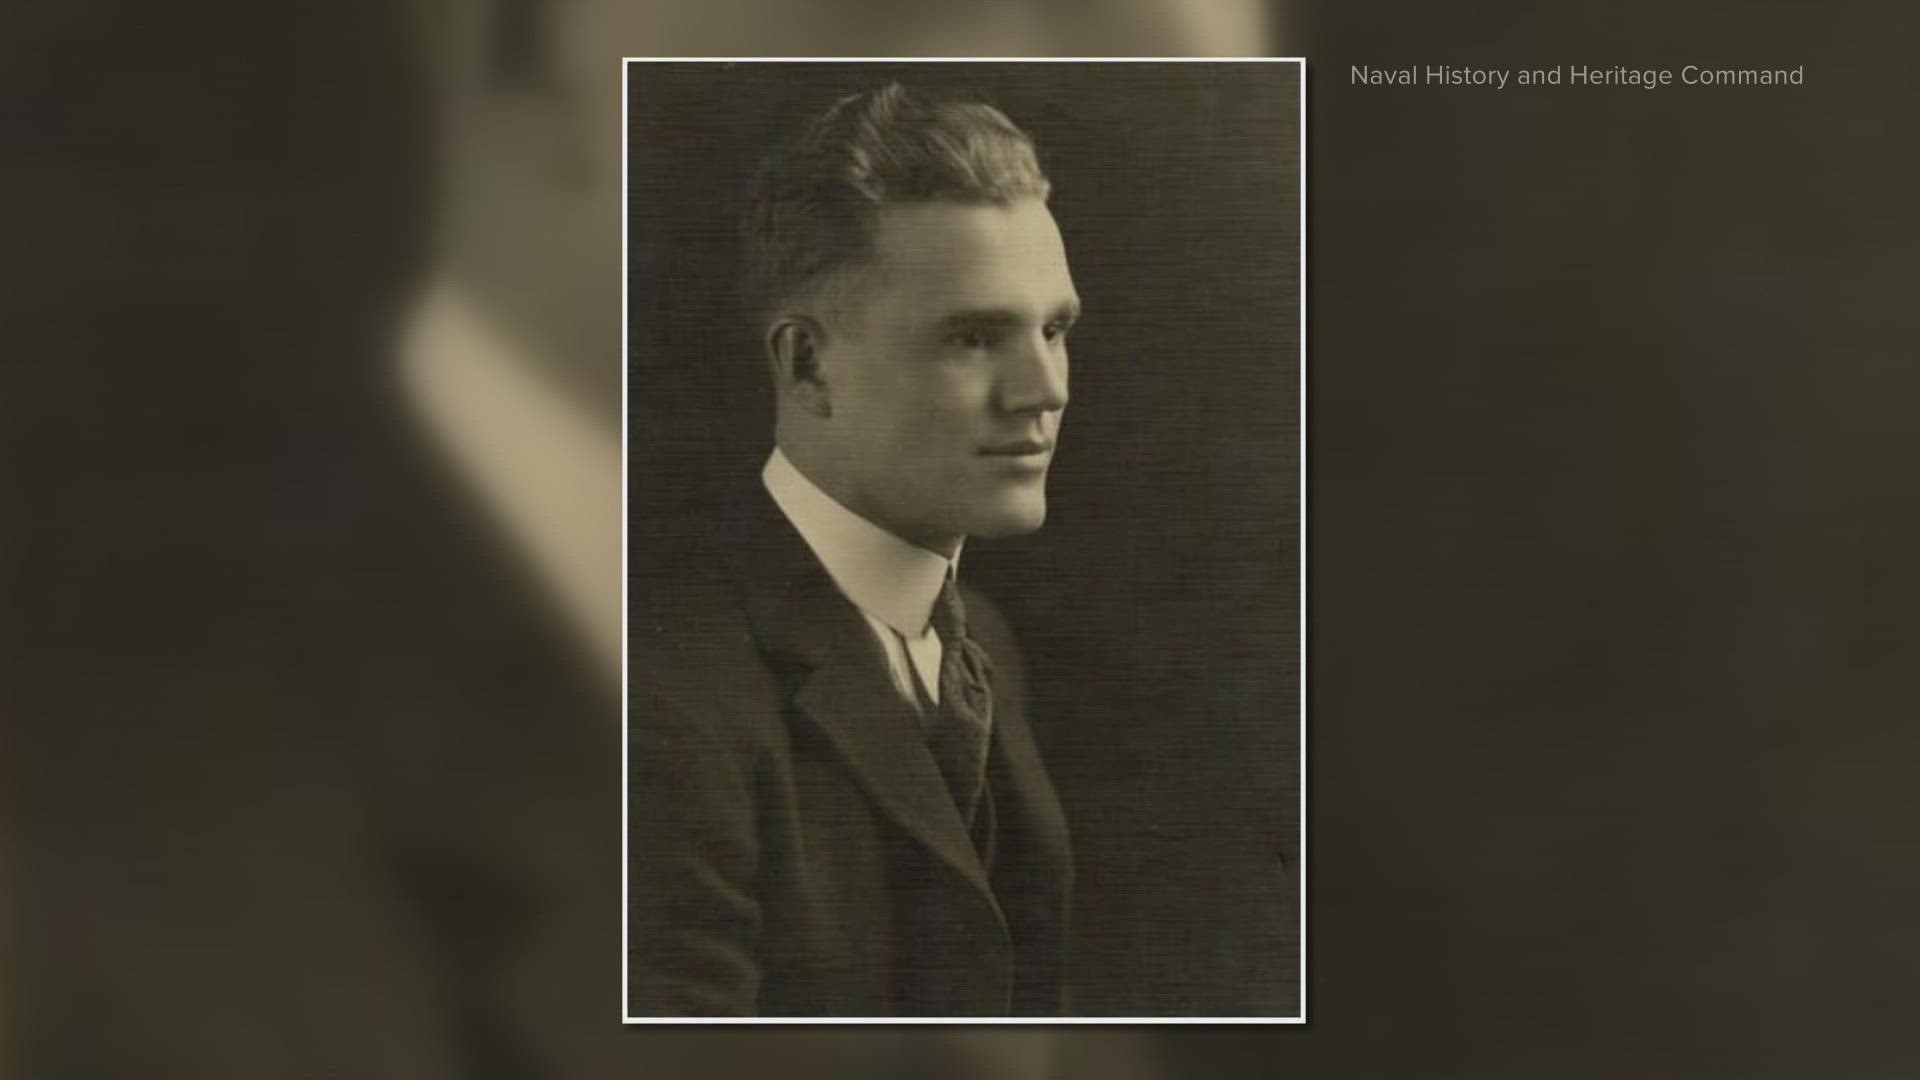 New Hope, Kentucky's James Cheshire's remains weren't identified until last year, when new DNA technology made the connection 80 years after the war.